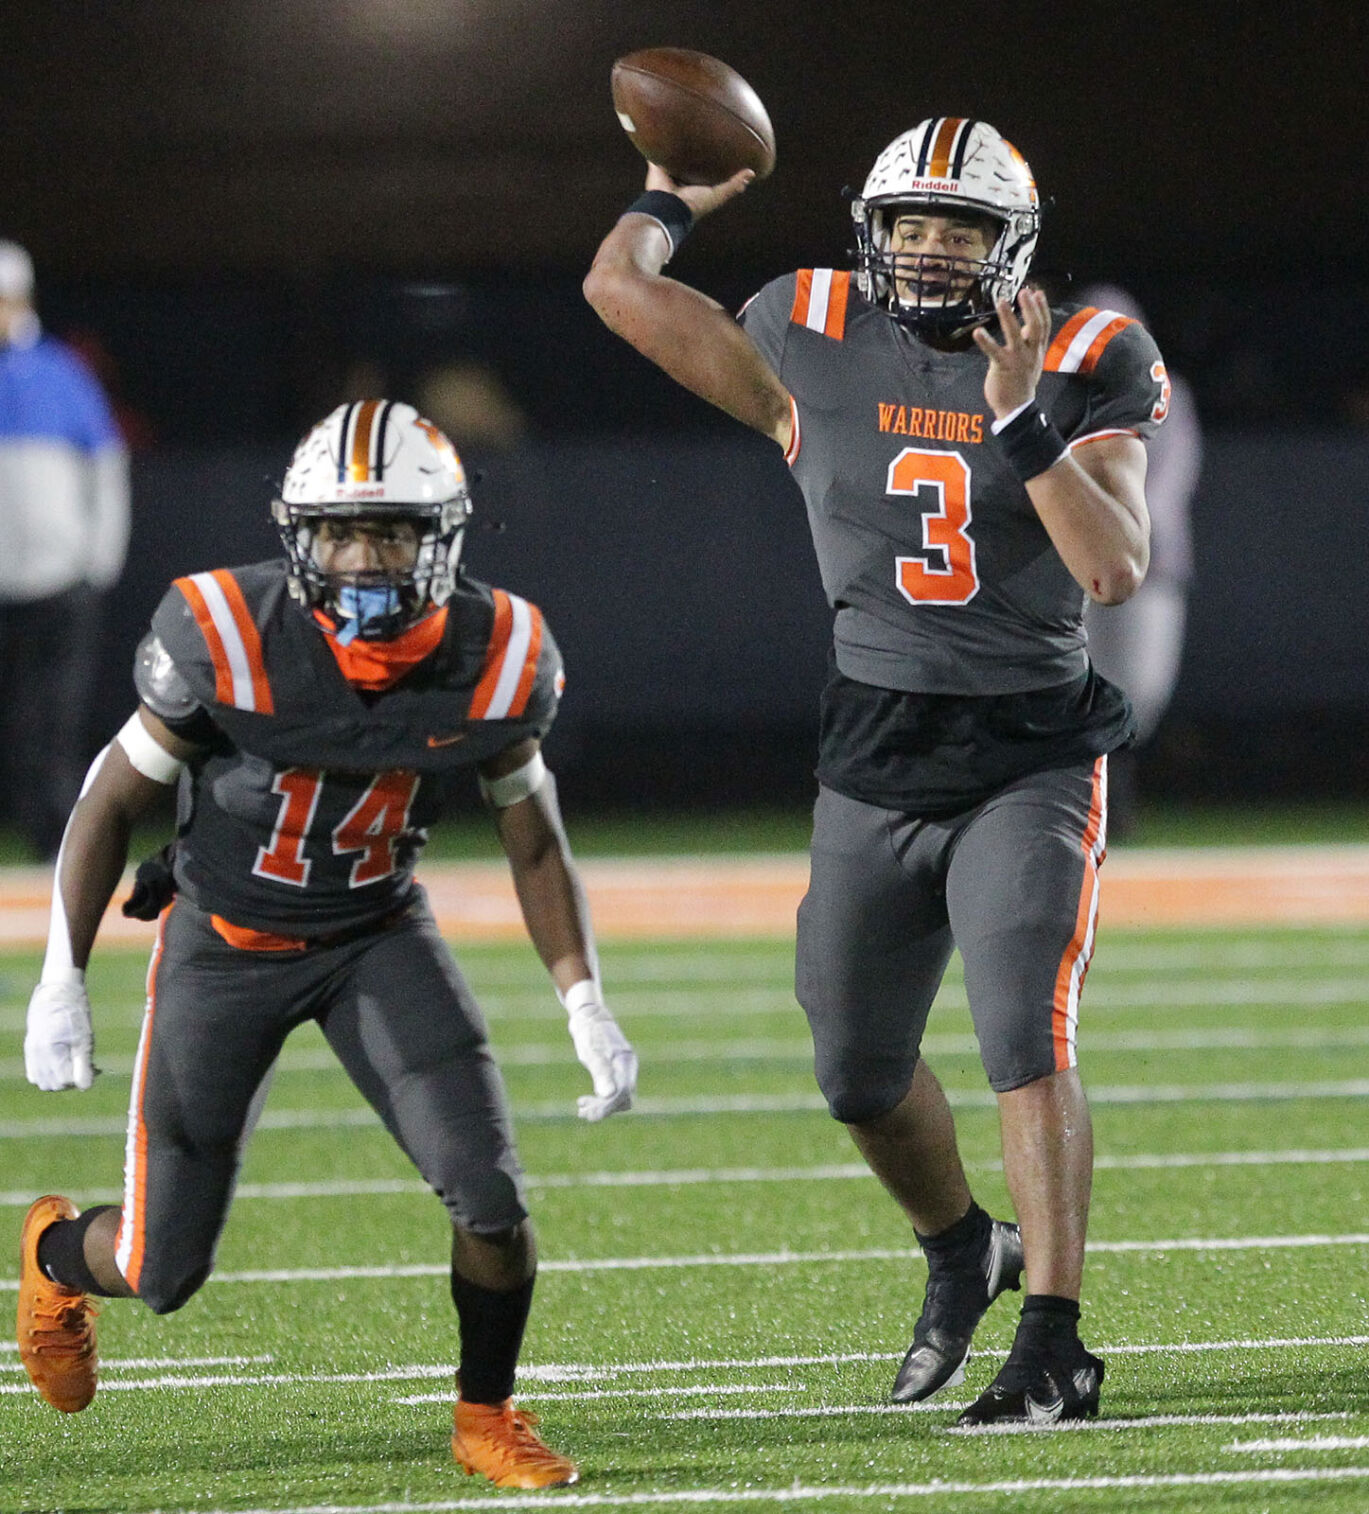 north cobb survives ground-based game to beat harrison in battle of state-ranked teams